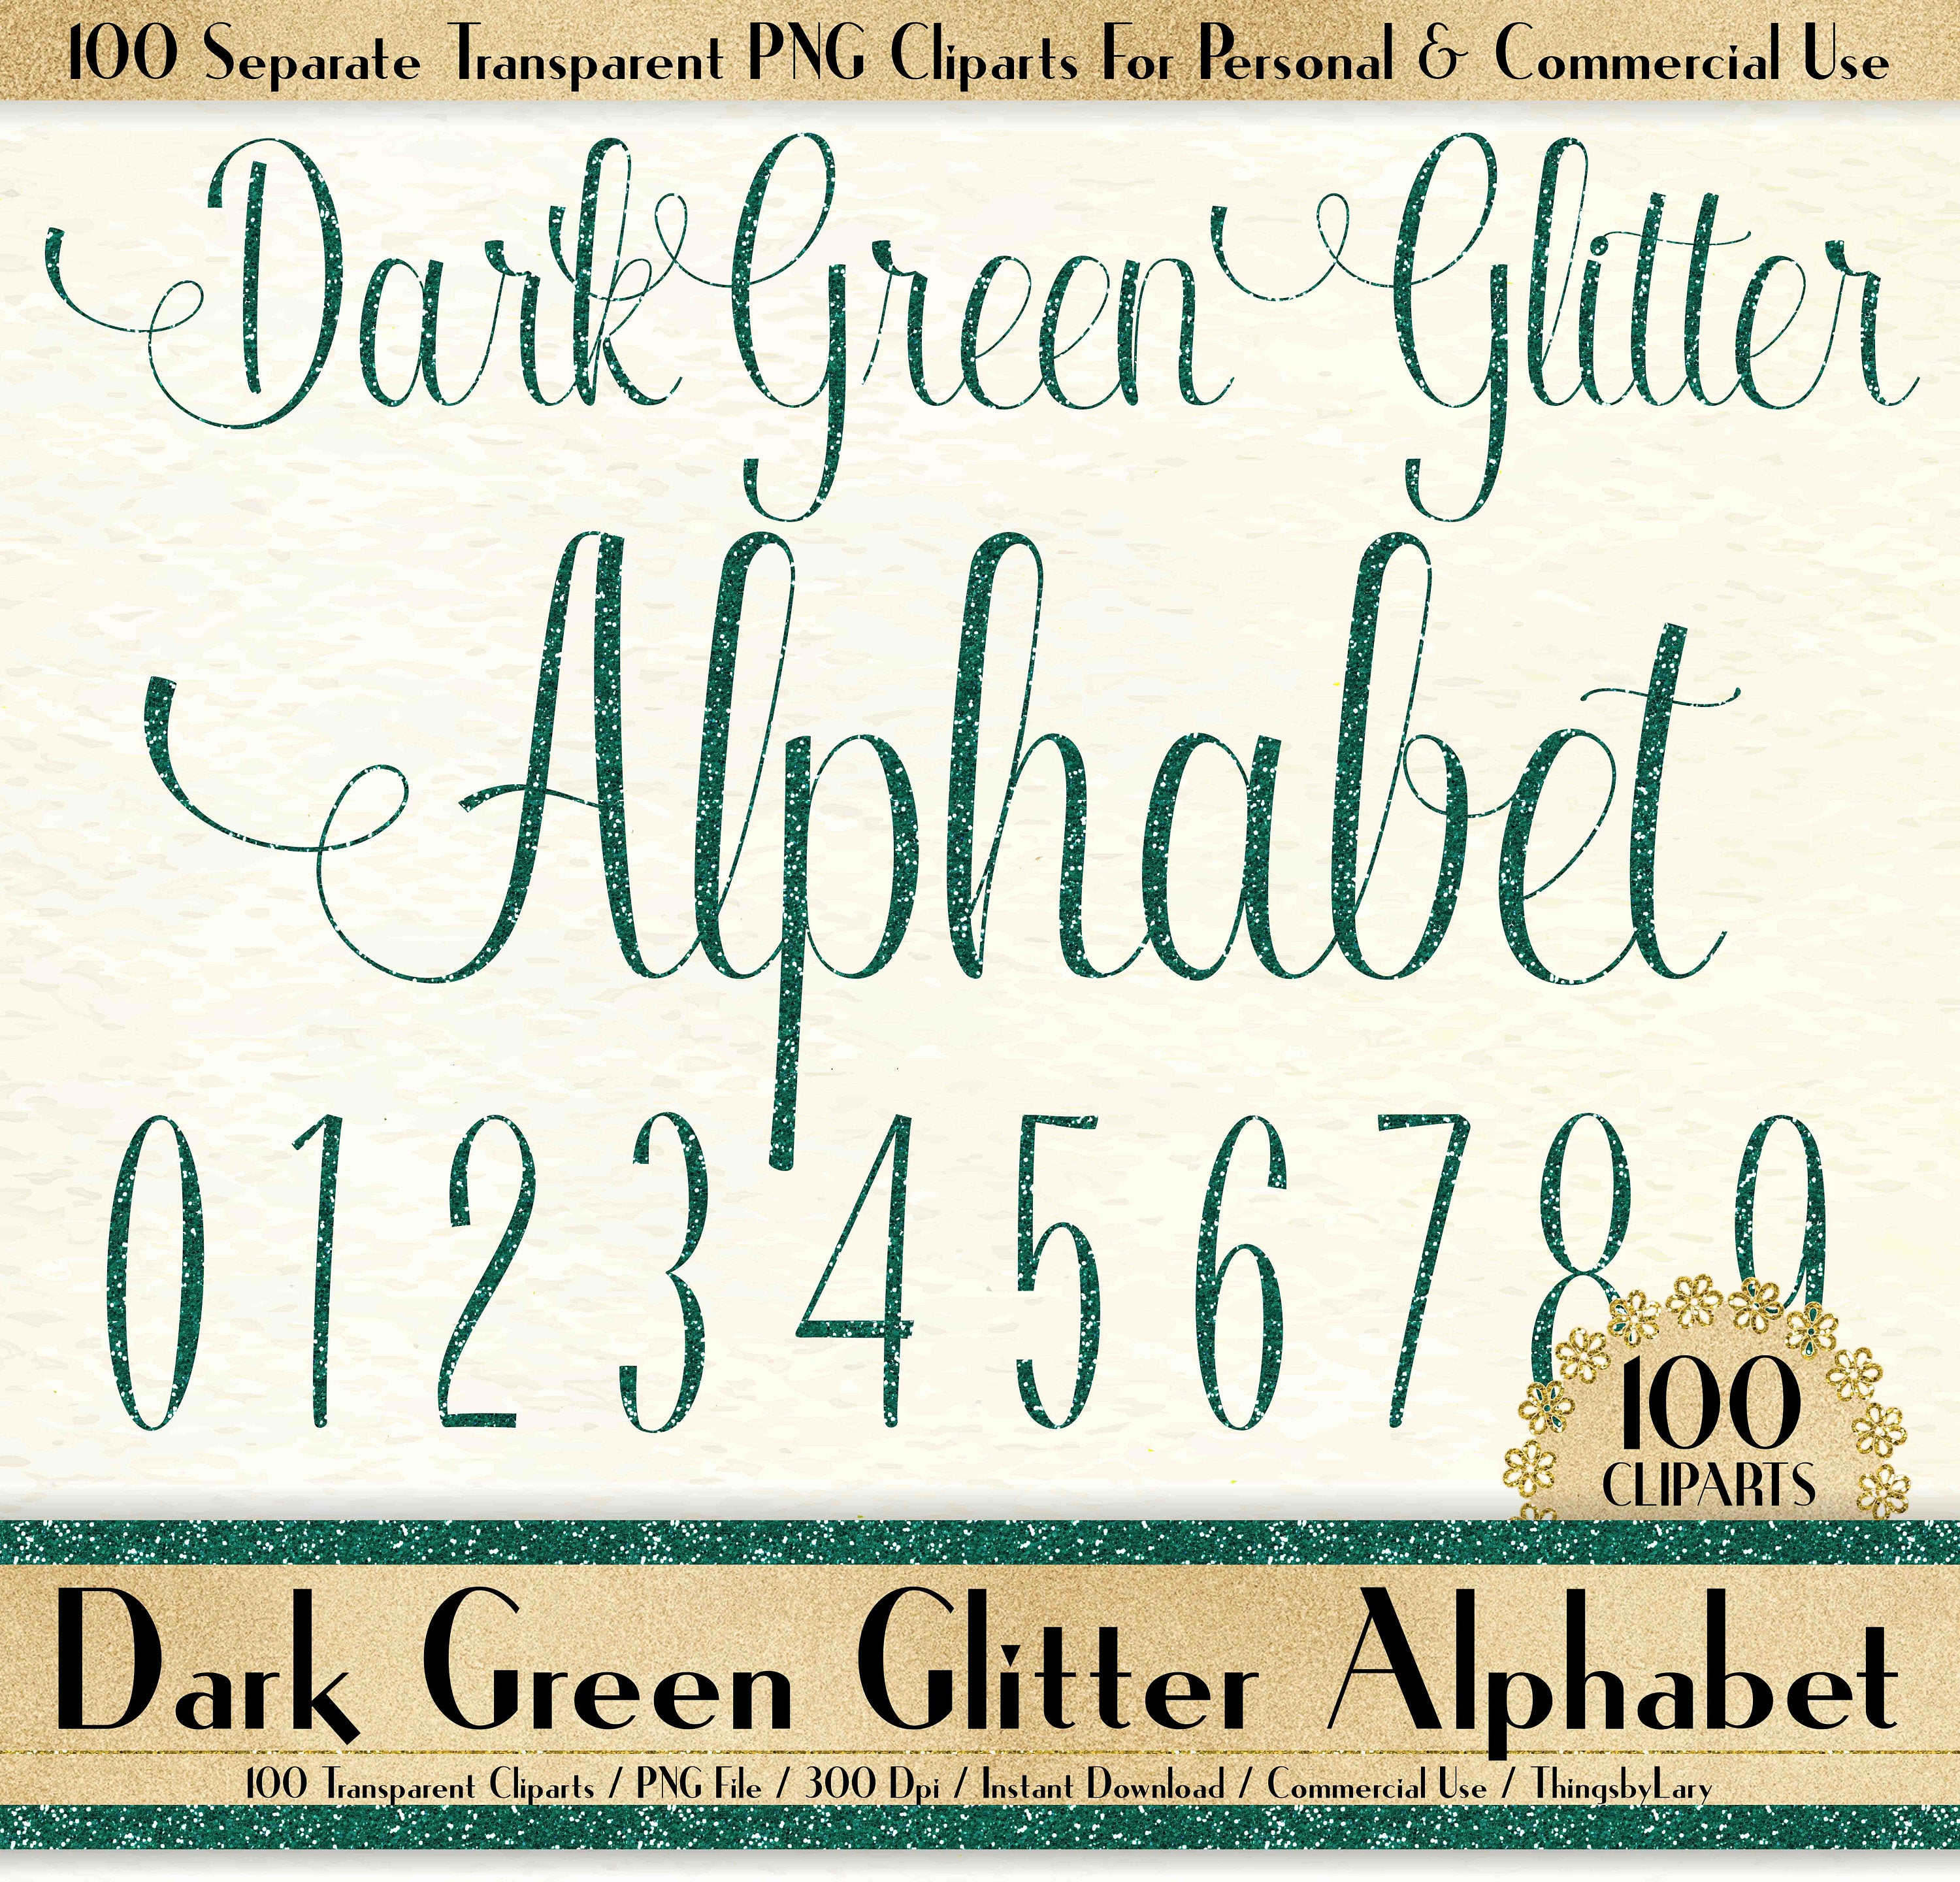 100 Dark Green Glitter Alphabet Cliparts in 12&quot; x 12&quot; Separate, 300 Dpi Instant Download, Commercial Use, 100 Transparent Number